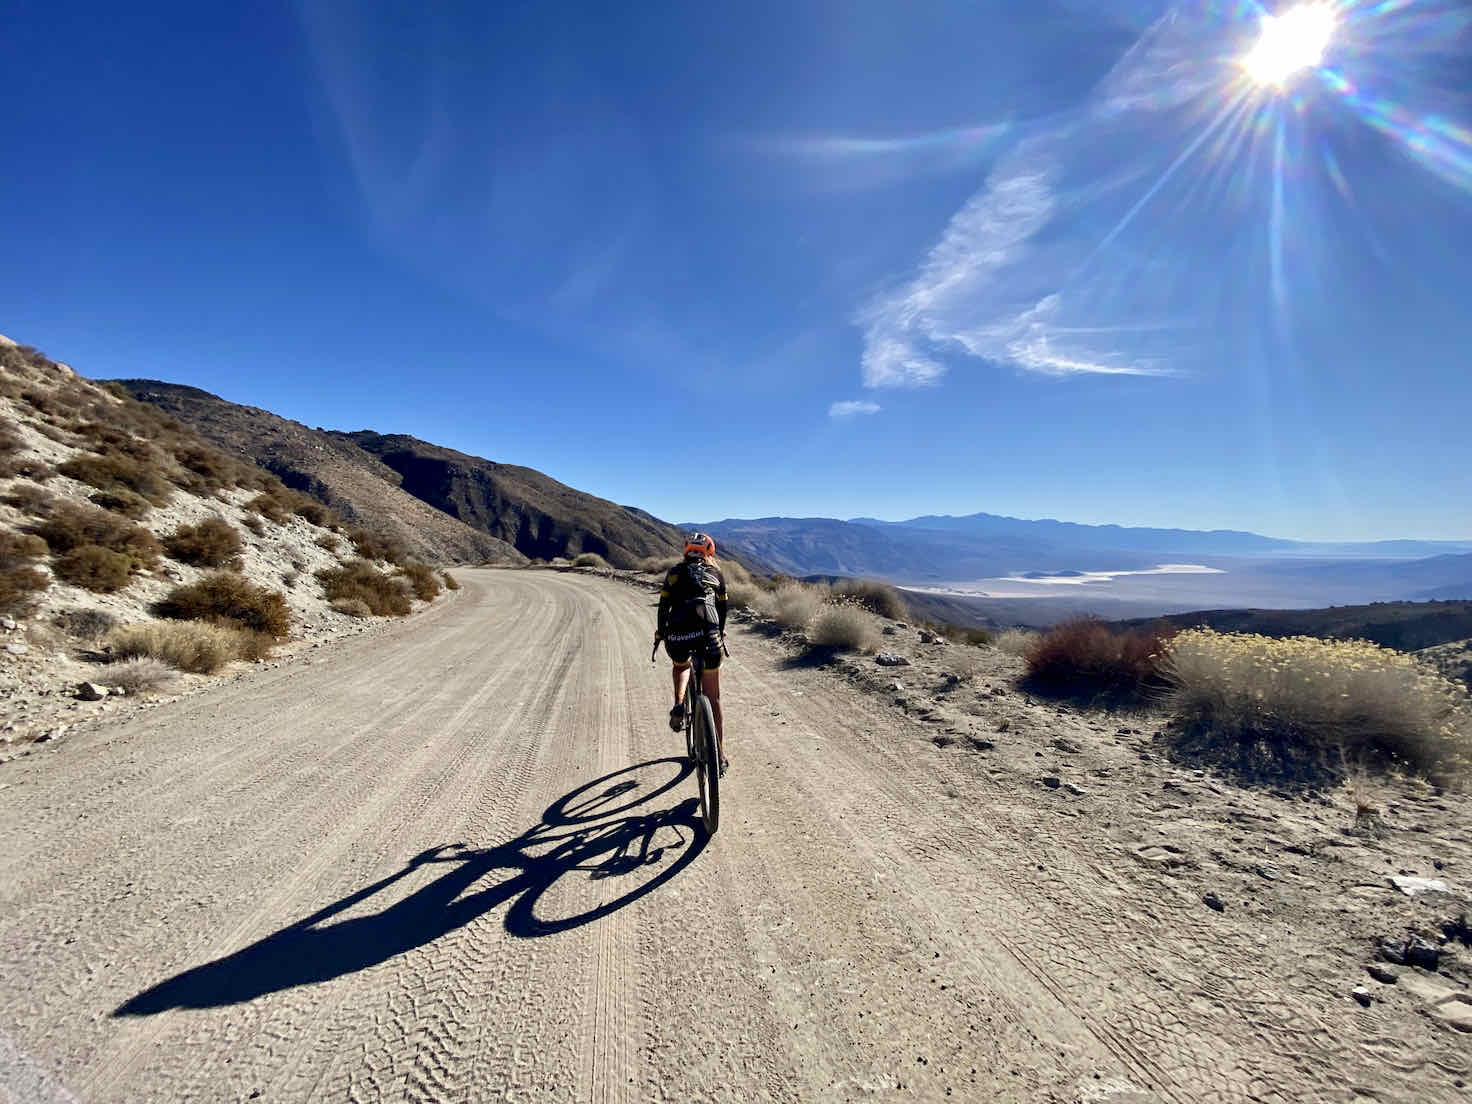 Cyclist on dirt road overlooking Panamint Valley in Death Valley.